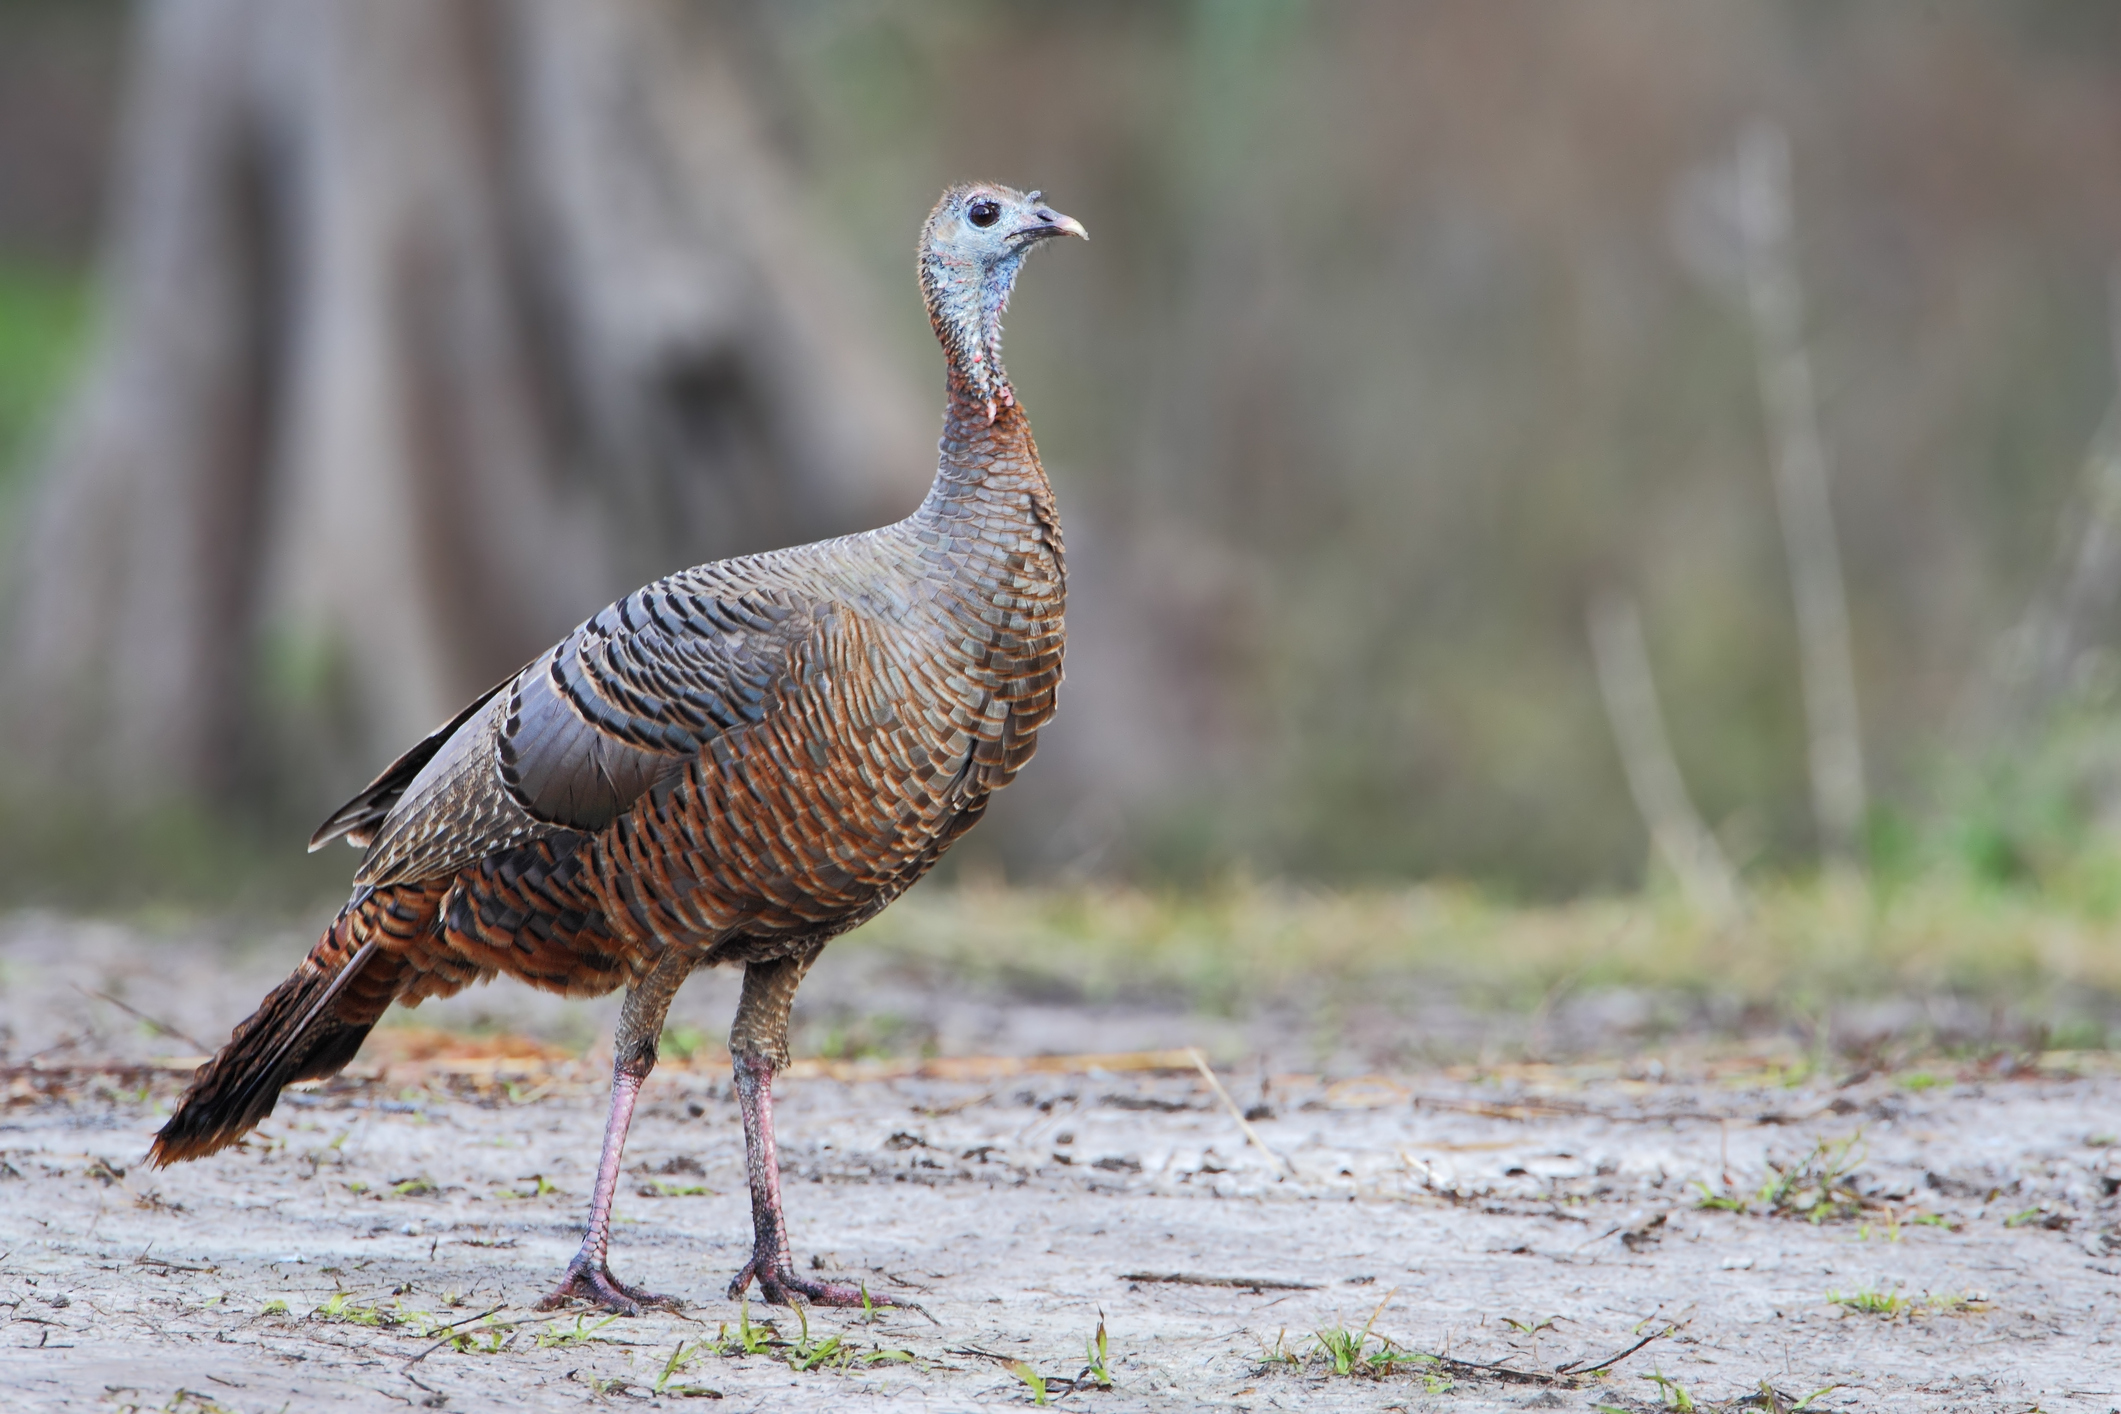 Help monitor the summer production of wild turkeys in Indiana